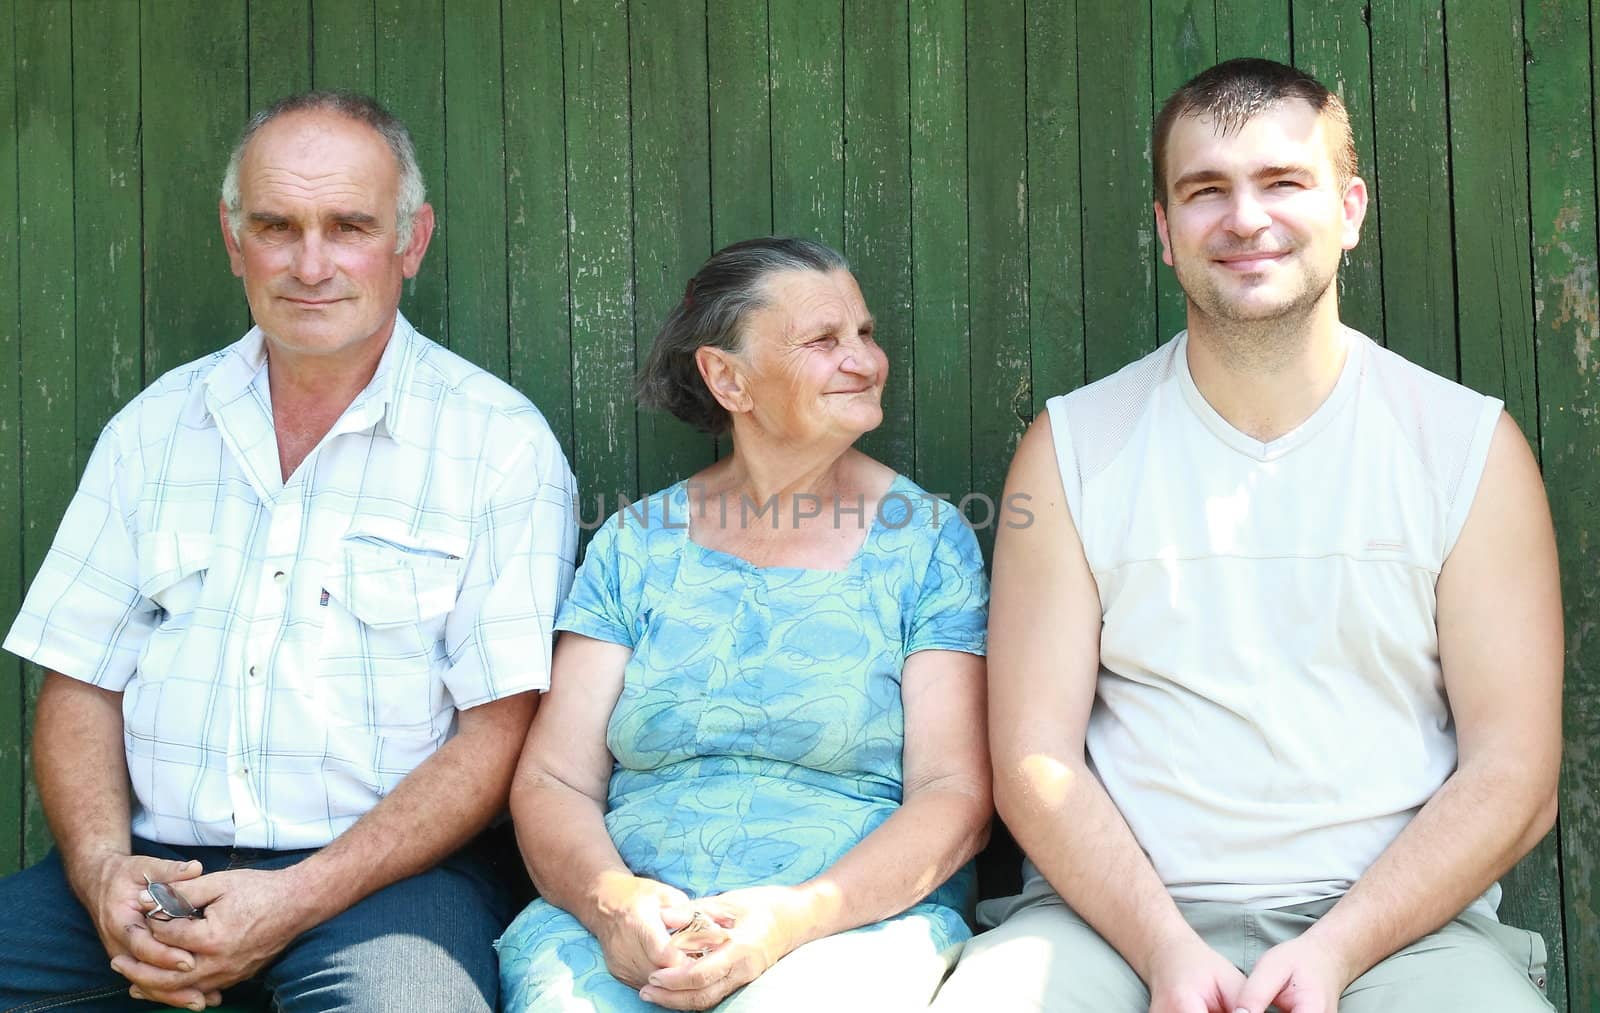 The son and grandson came to visit her grandmother, and sat on a bench near the courtyard